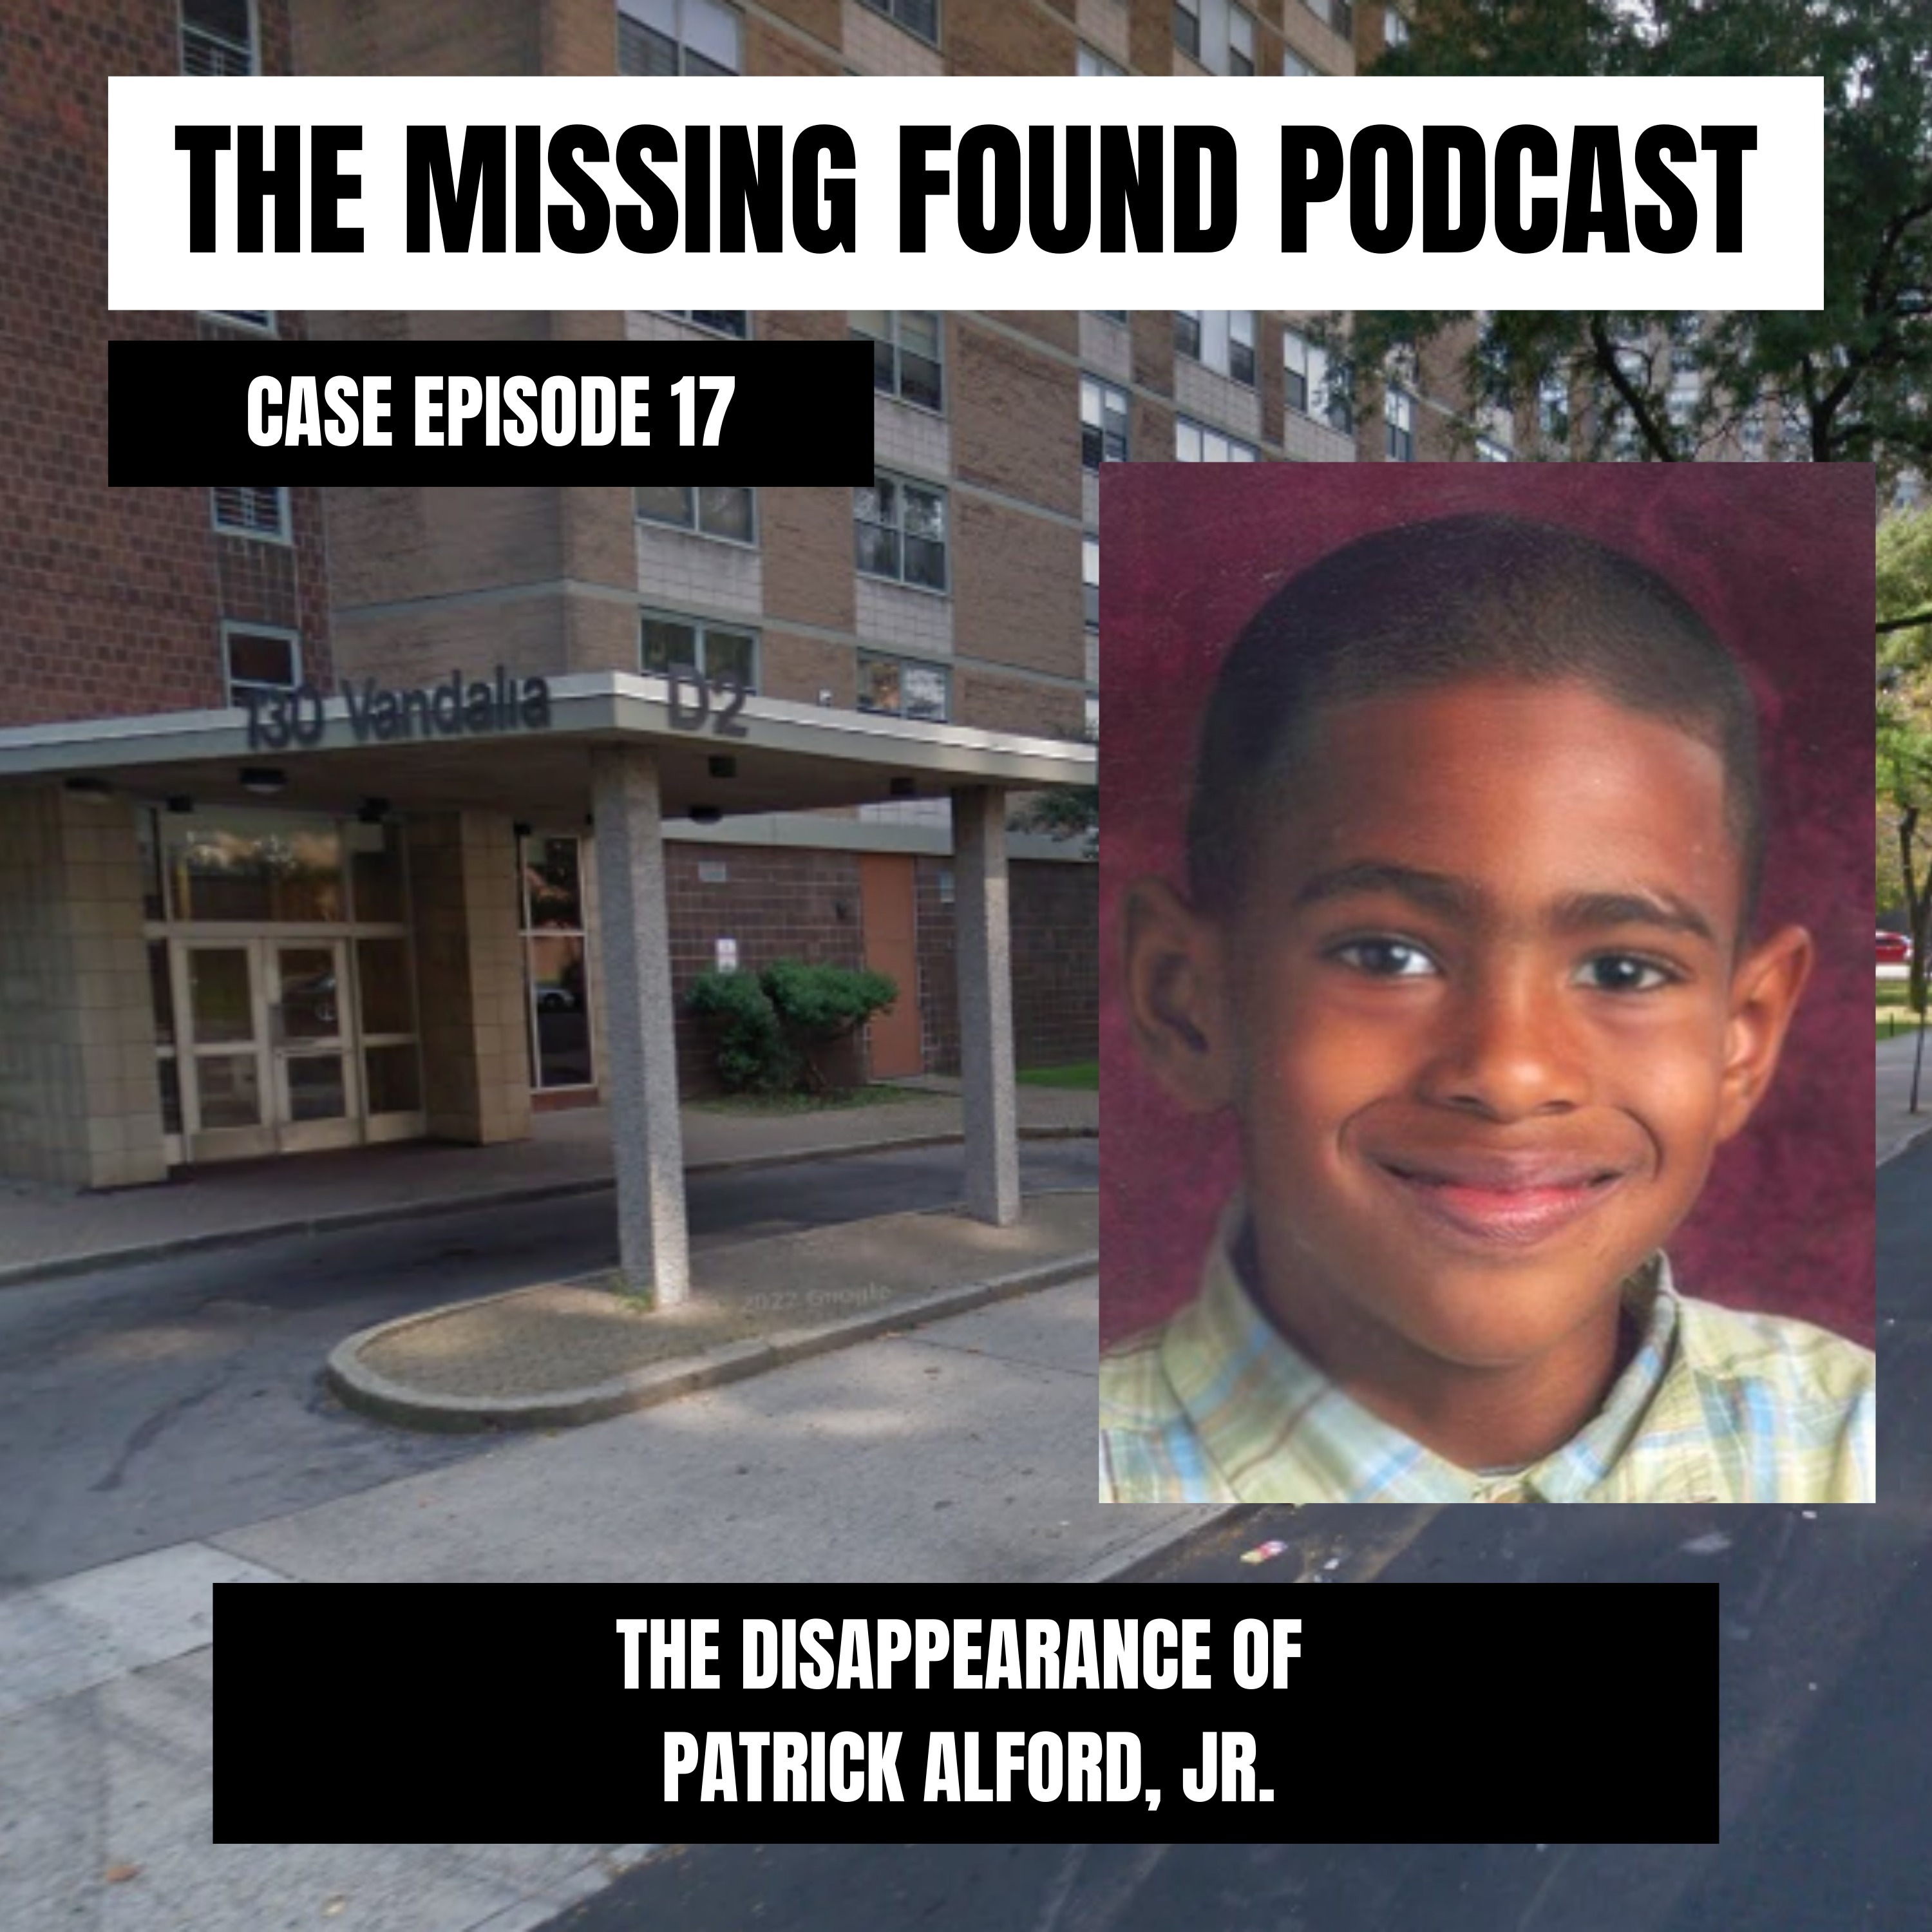 Case Episode 17: Patrick Alford, Jr.: Don’t Answer the Phone. A Nearly 14 Year Grim Mystery that Spans from NY to Puerto Rico